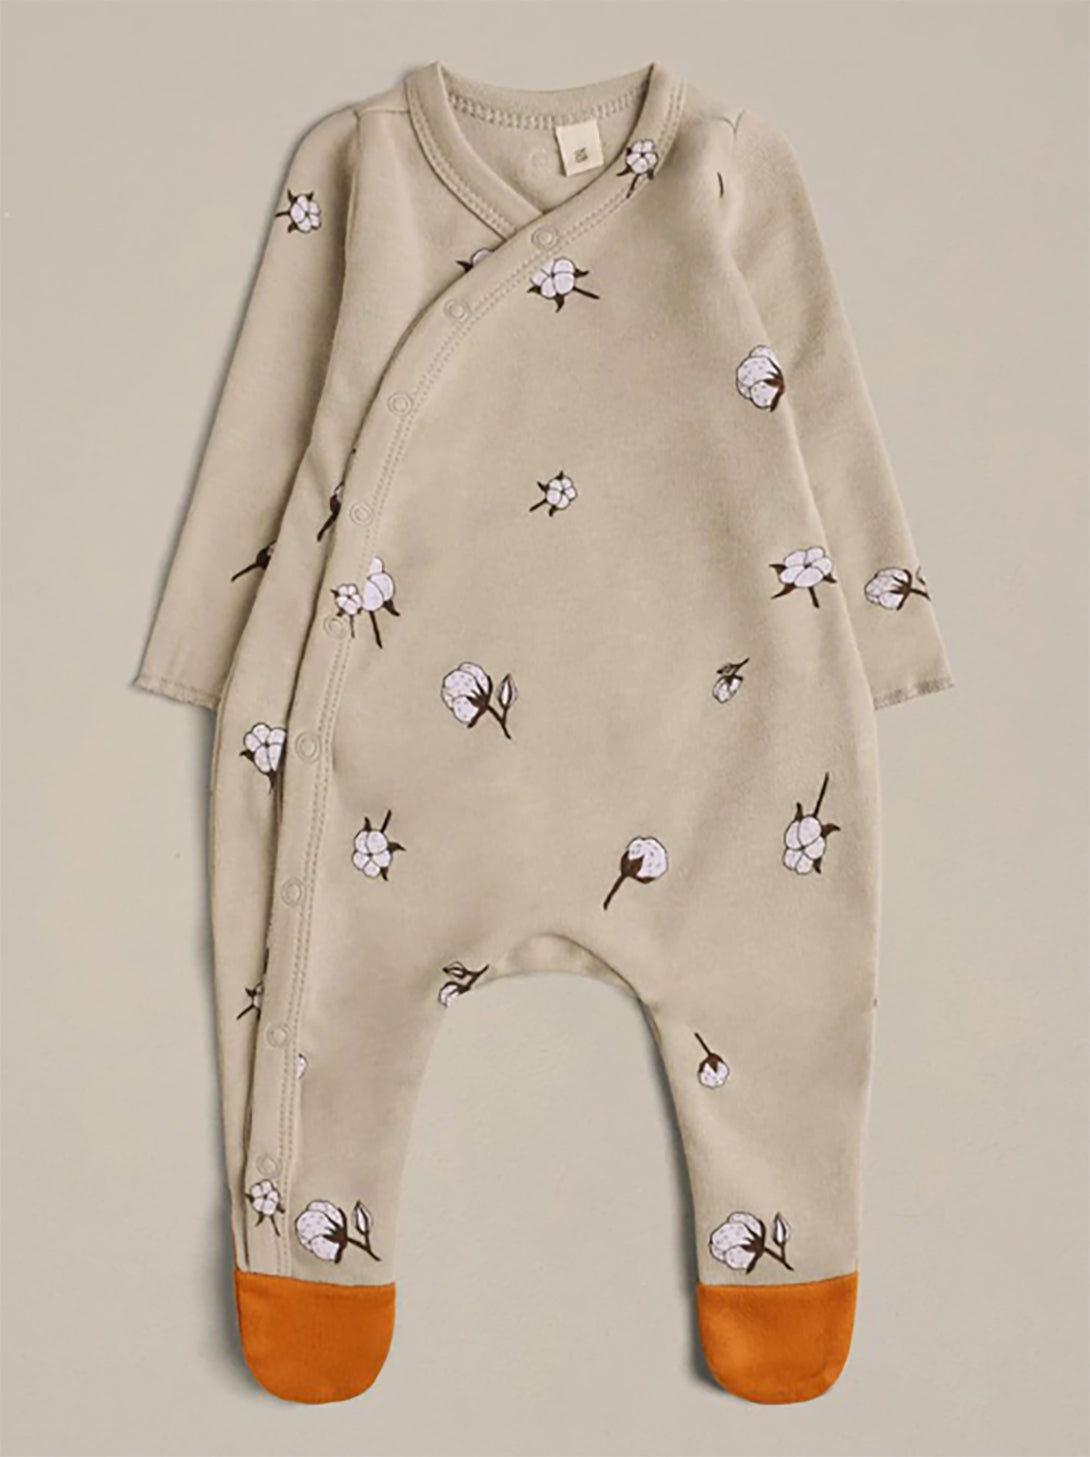 【organic zoo】Cottonfield Suit with contrast feet 足つきロンパース 0-3m,3-6m,6-12m  | Coucoubebe/ククベベ